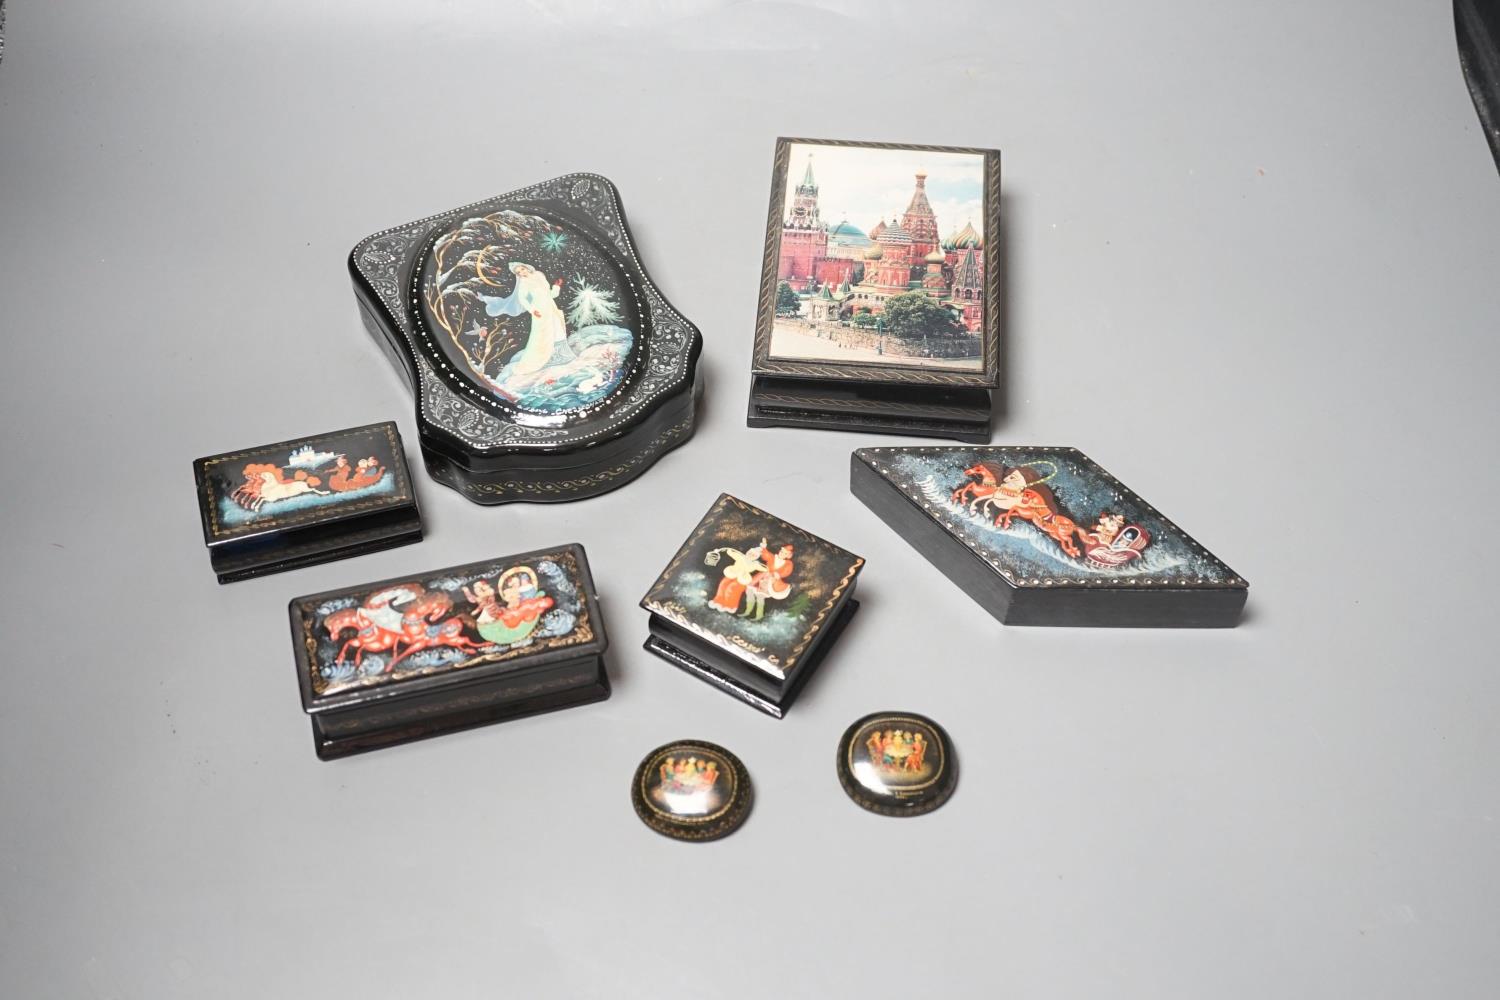 Eight Russian lacquer boxes, some painted and some with printed decoration